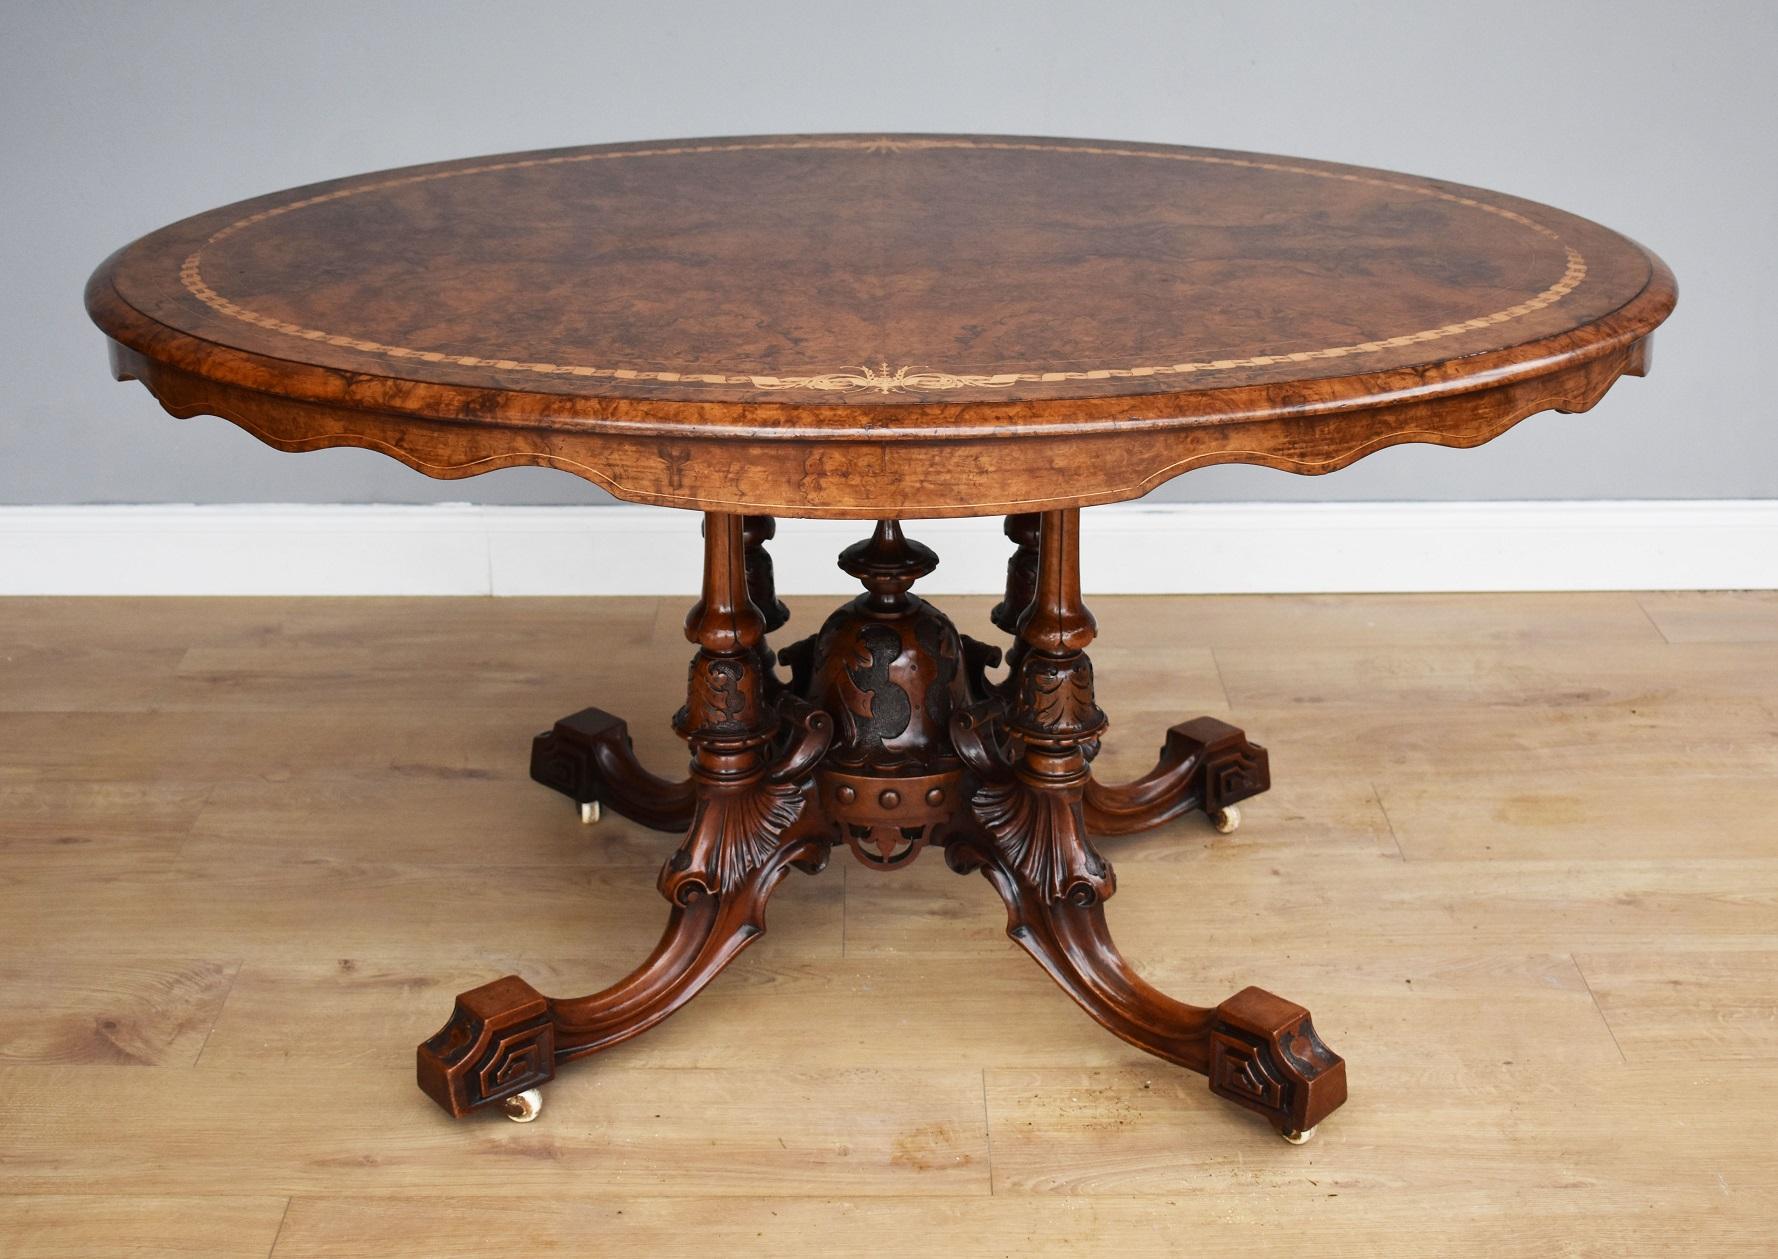 For sale is a good quality Victorian burr walnut breakfast table, having a well figured top with fine inlays to the edge. Below this, the table has a superbly carved birdcage base, with ornately columns, central finial and fine decorative carvings.